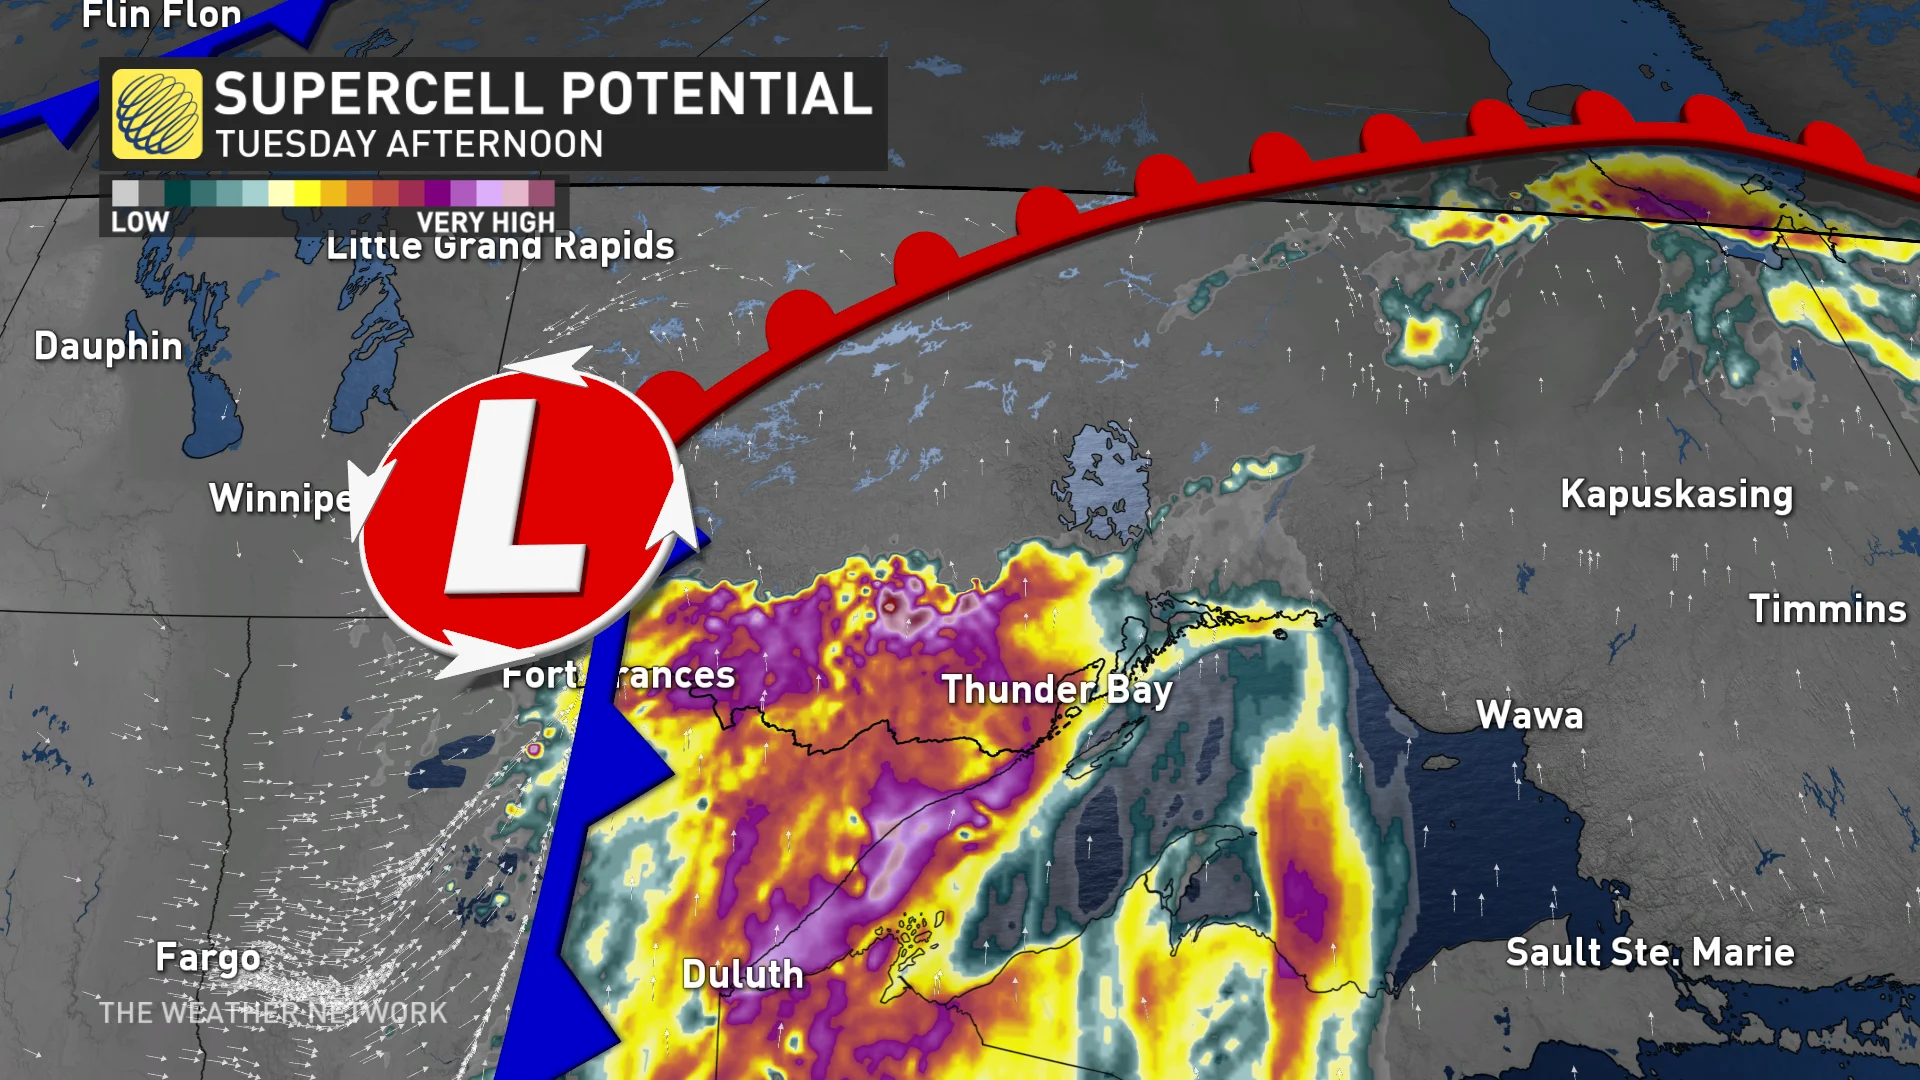 Tuesday upercell potential in northwestern Ontario_June 17